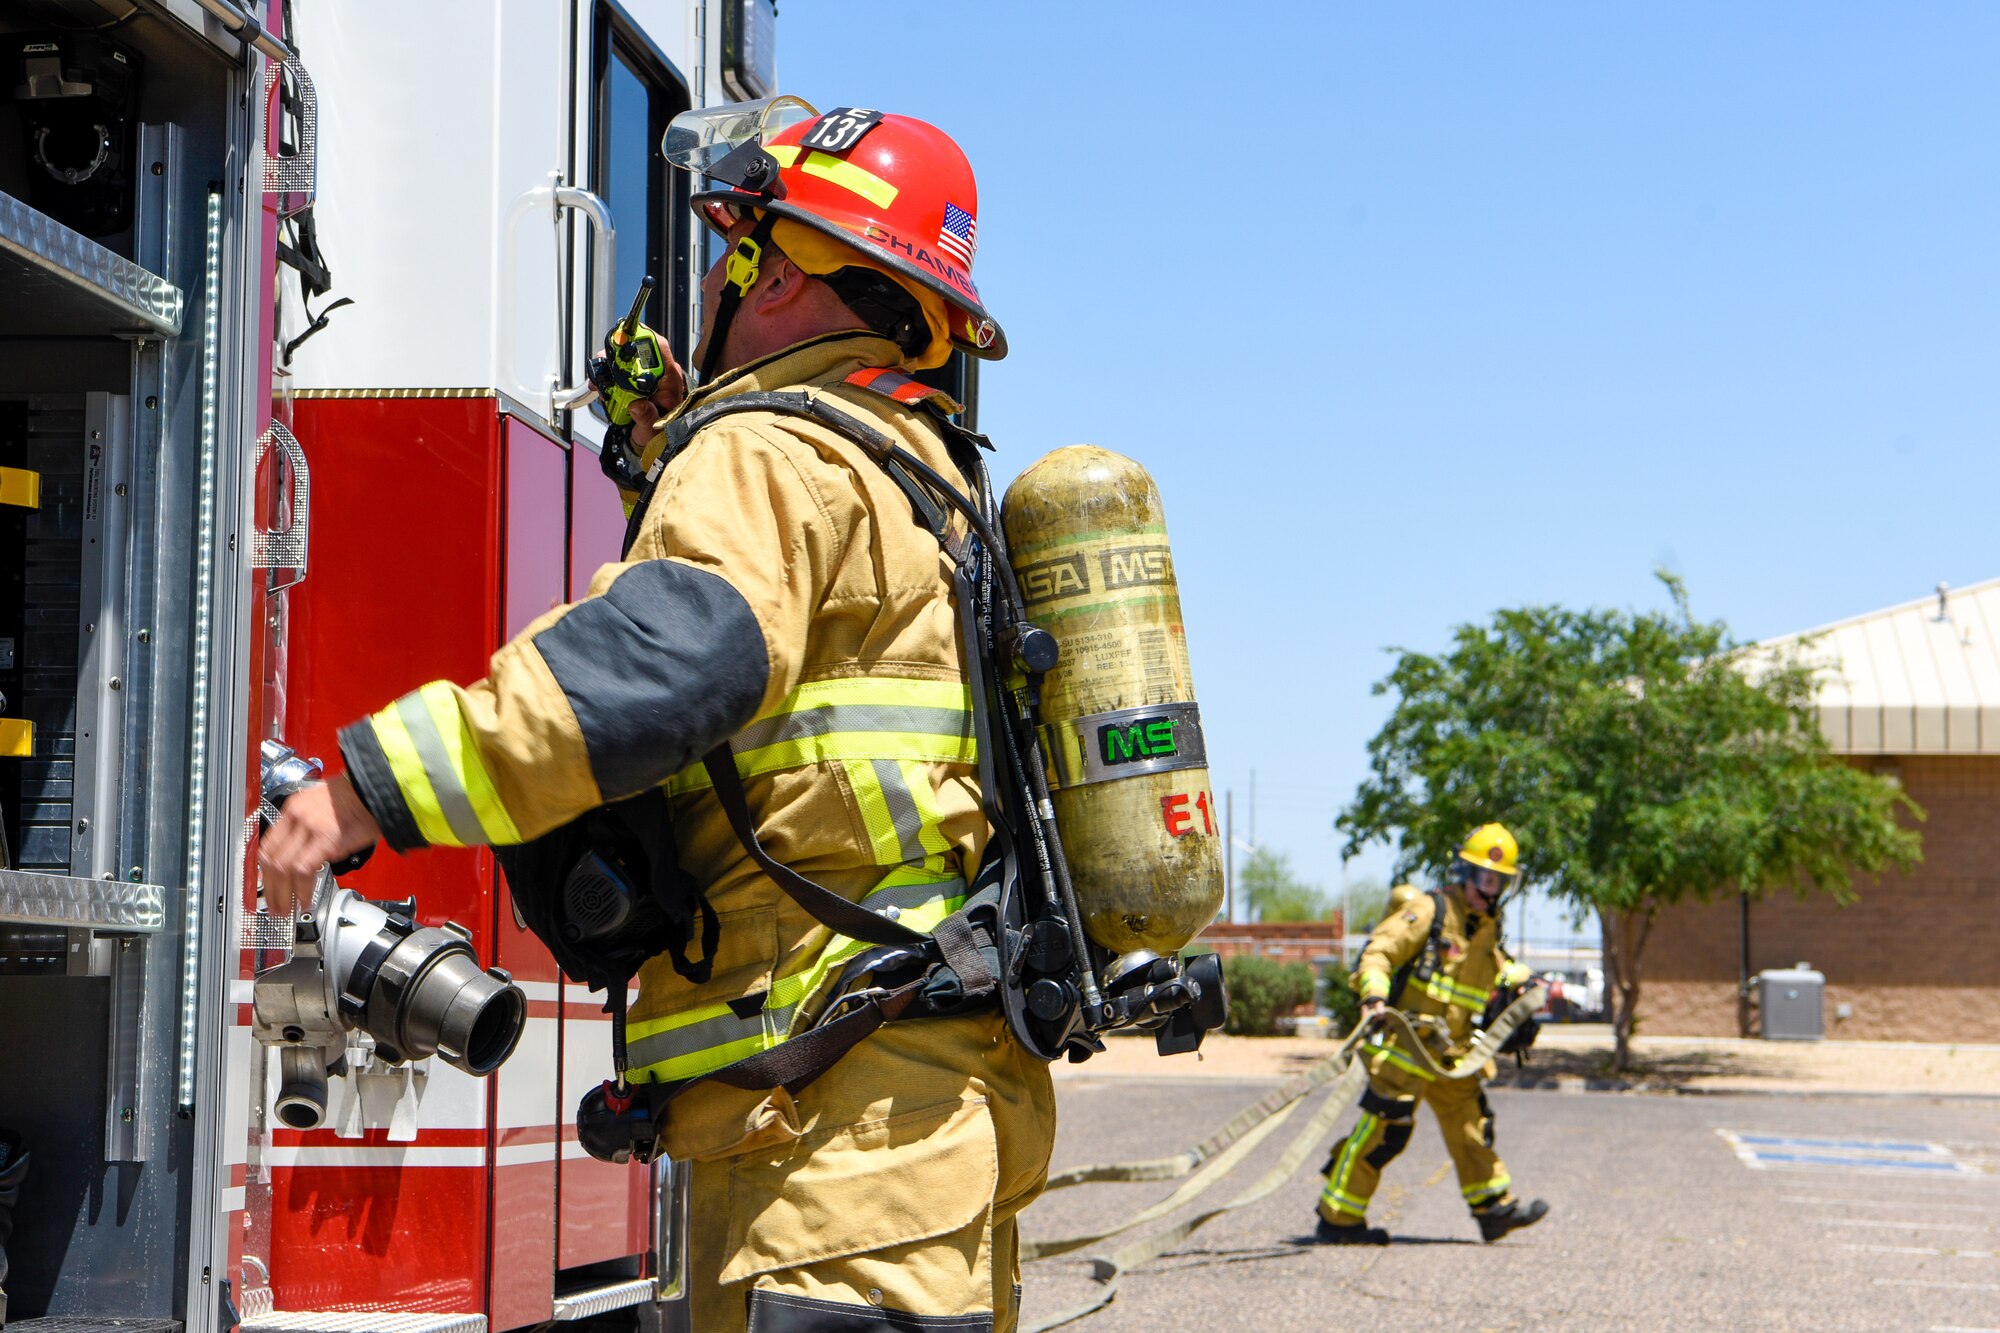 Firefighters from the west valley prepare to lay hose for a joint training exercise May 3, 2019, at Luke Air Force Base, Ariz. The multi-company standard training focused on meeting and excelling in the benchmarks of consistency in fire operations and stretching hose lines to upper levels of buildings. (U.S. Air Force photo by Airman 1st Class Zoie Cox)